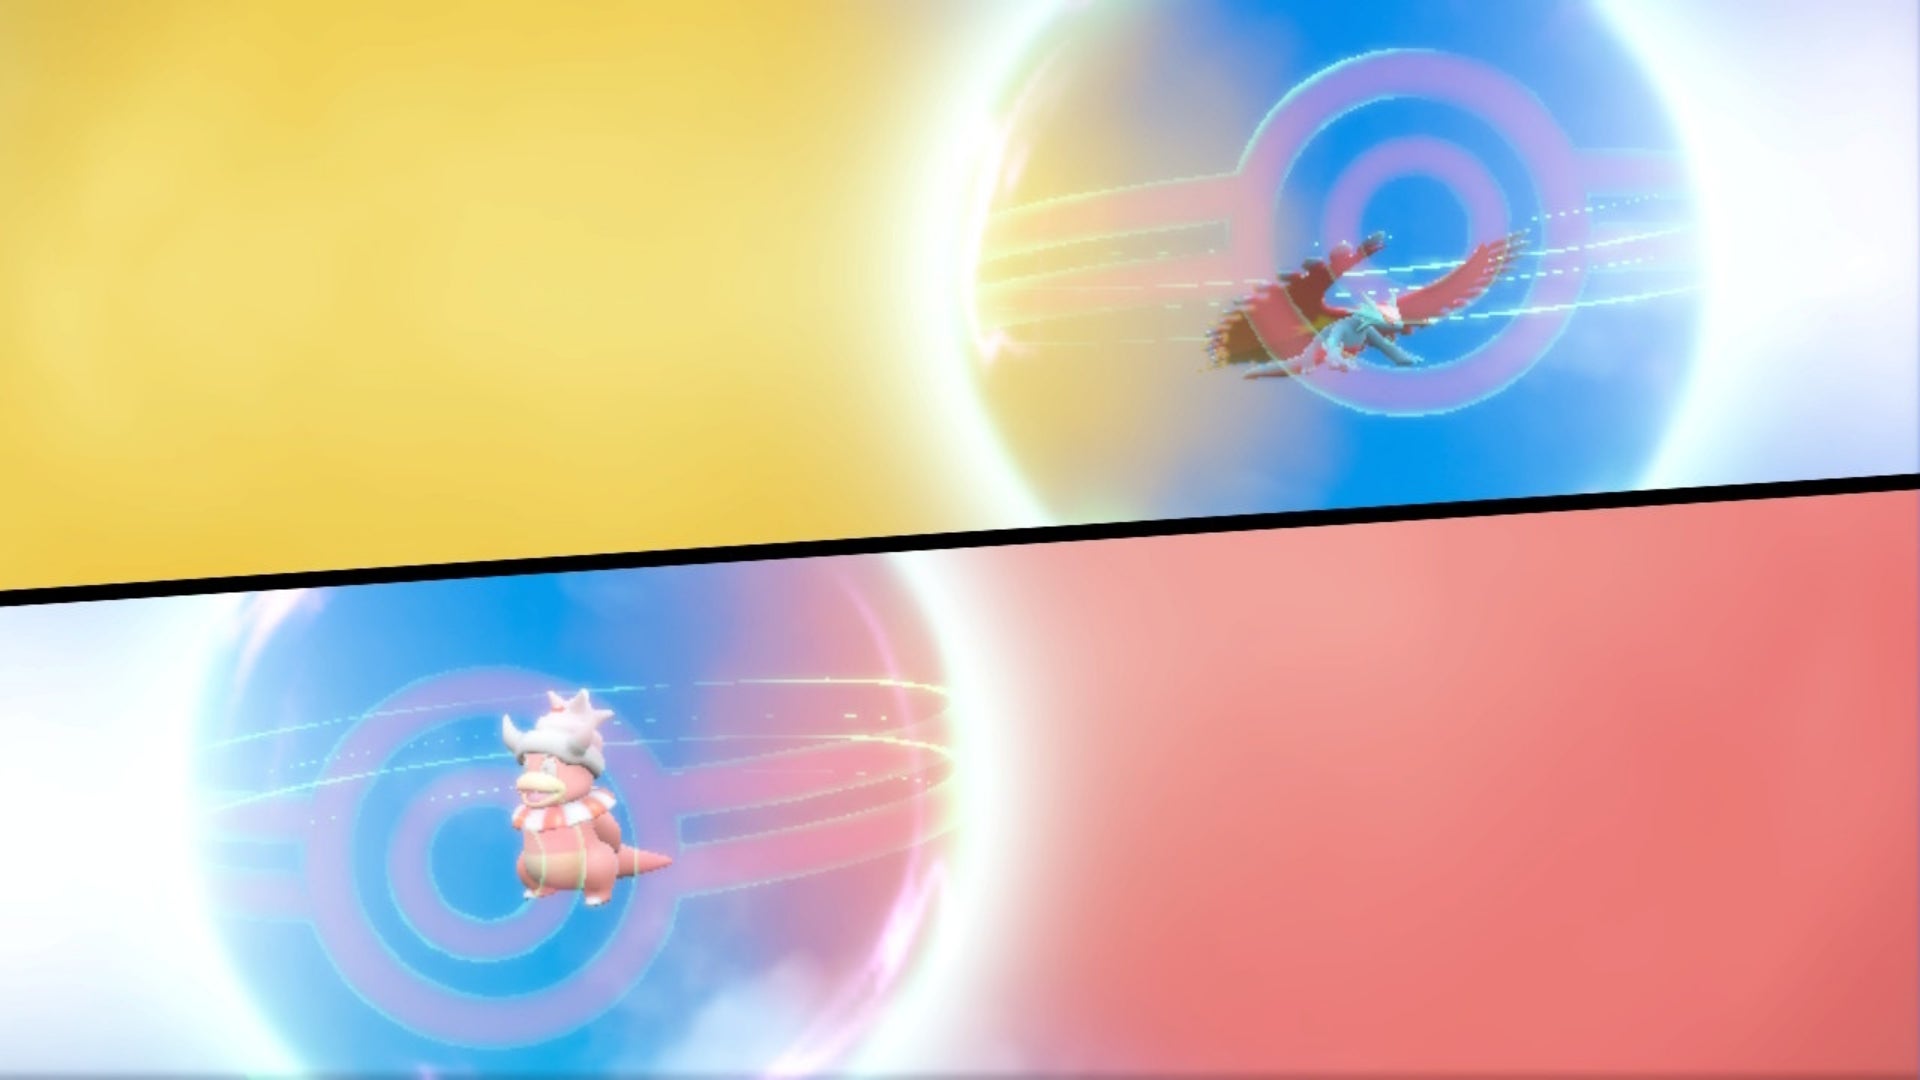 A Slowpoke is being traded to evolve into Slowking in Pokemon Scarlet and Violet